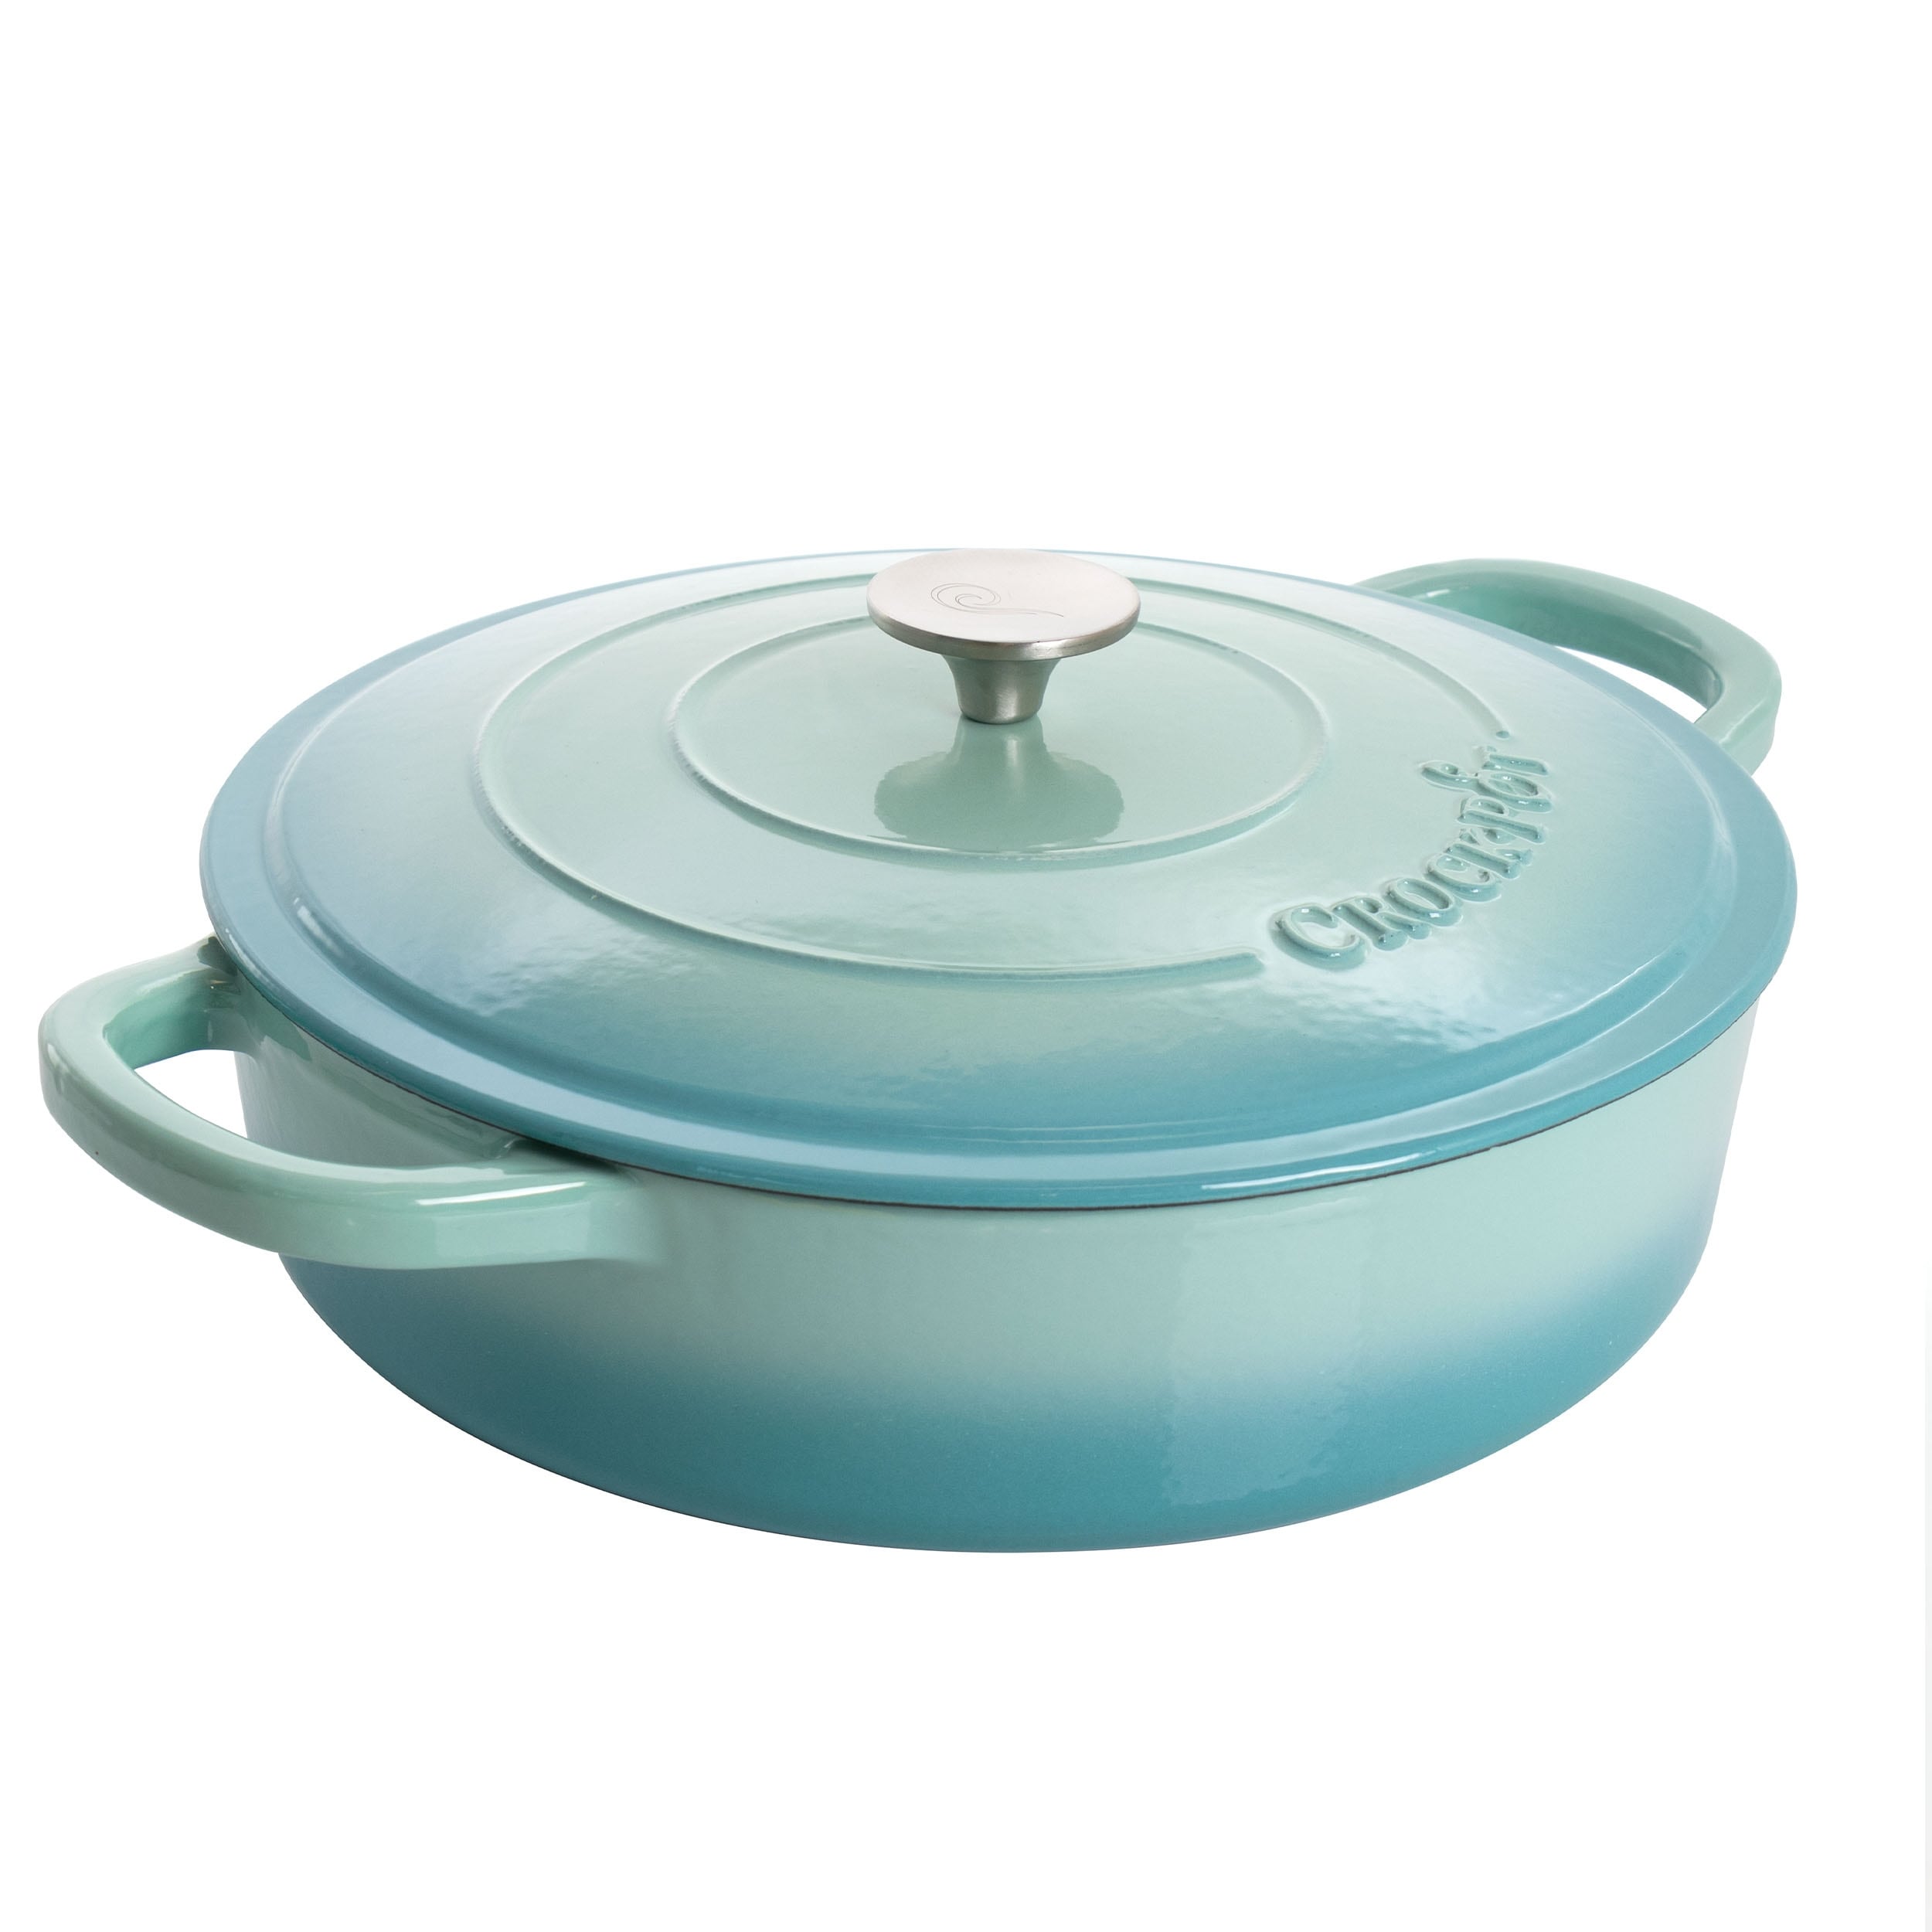 5 Quart Round Enameled Cast Iron Braiser Pan with Lid in Arctic Teal - Blue